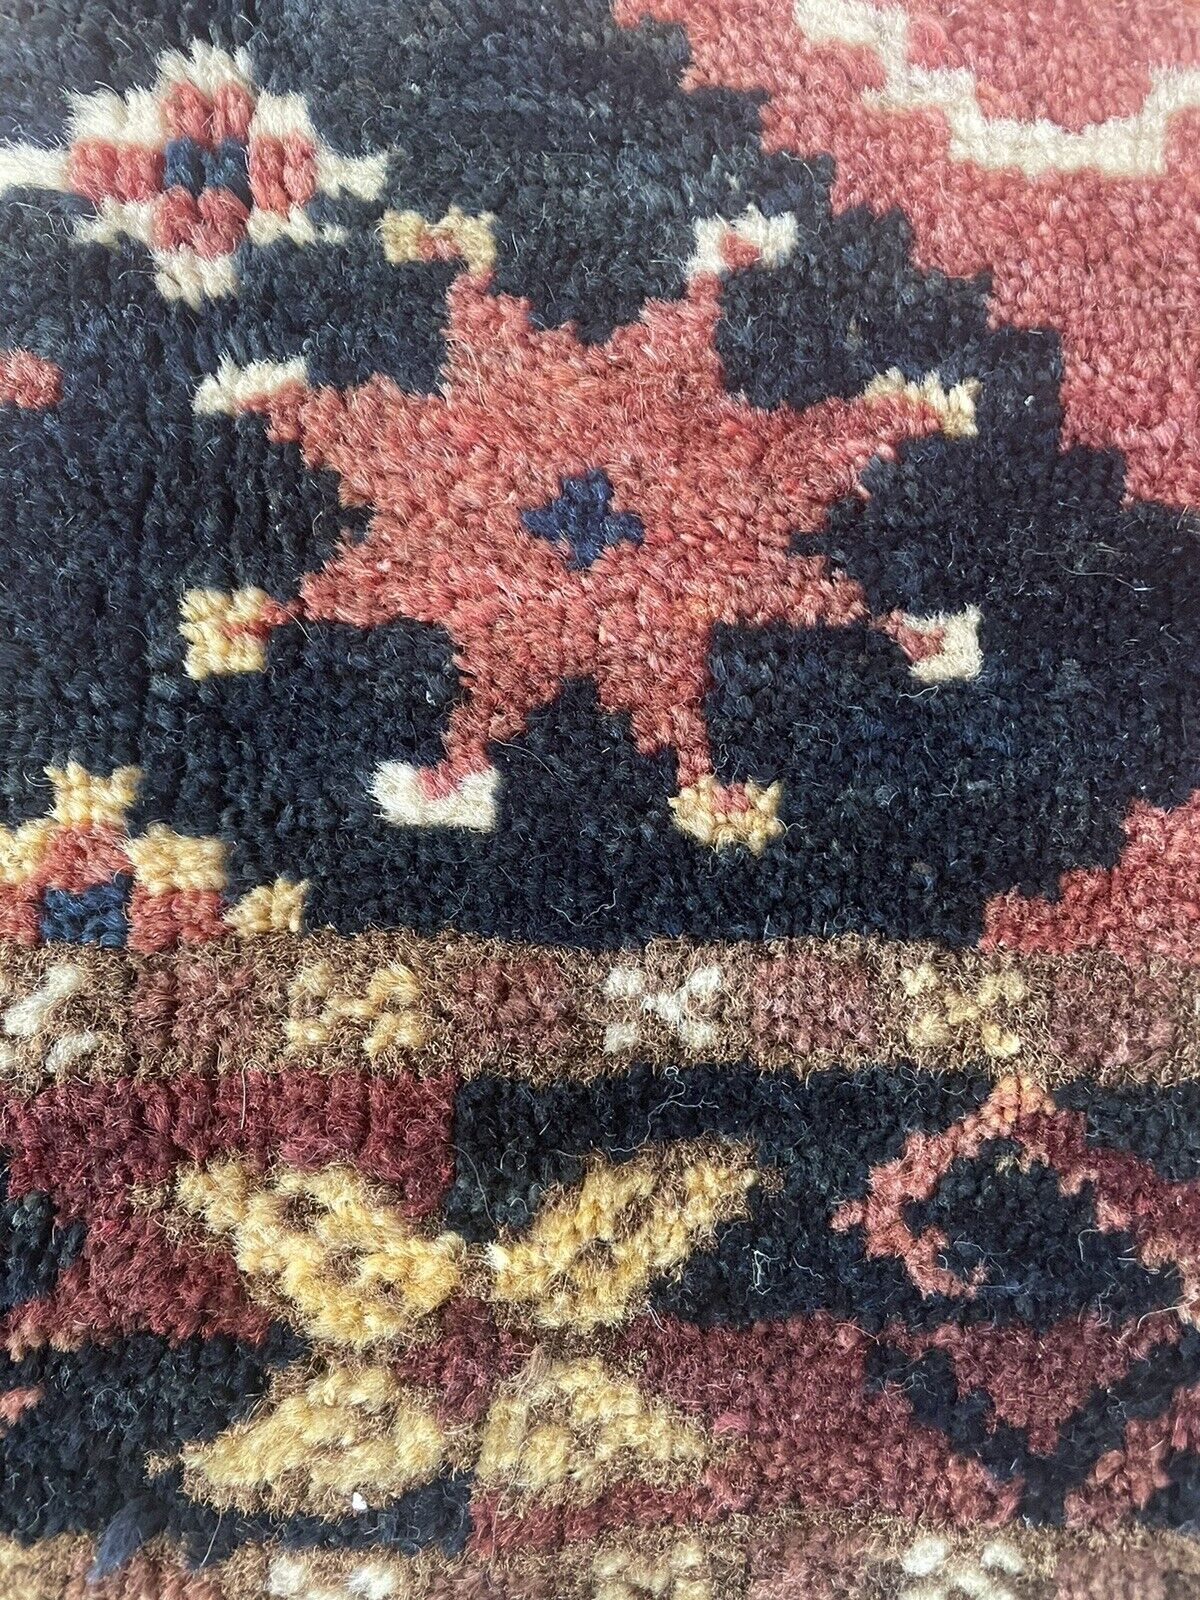 Close-up of authenticity on Handmade Antique Afghan Beshir Collectible Chuval Rug - Detailed view highlighting the rug's authenticity as a collectible piece cherished for its historical significance and craftsmanship.